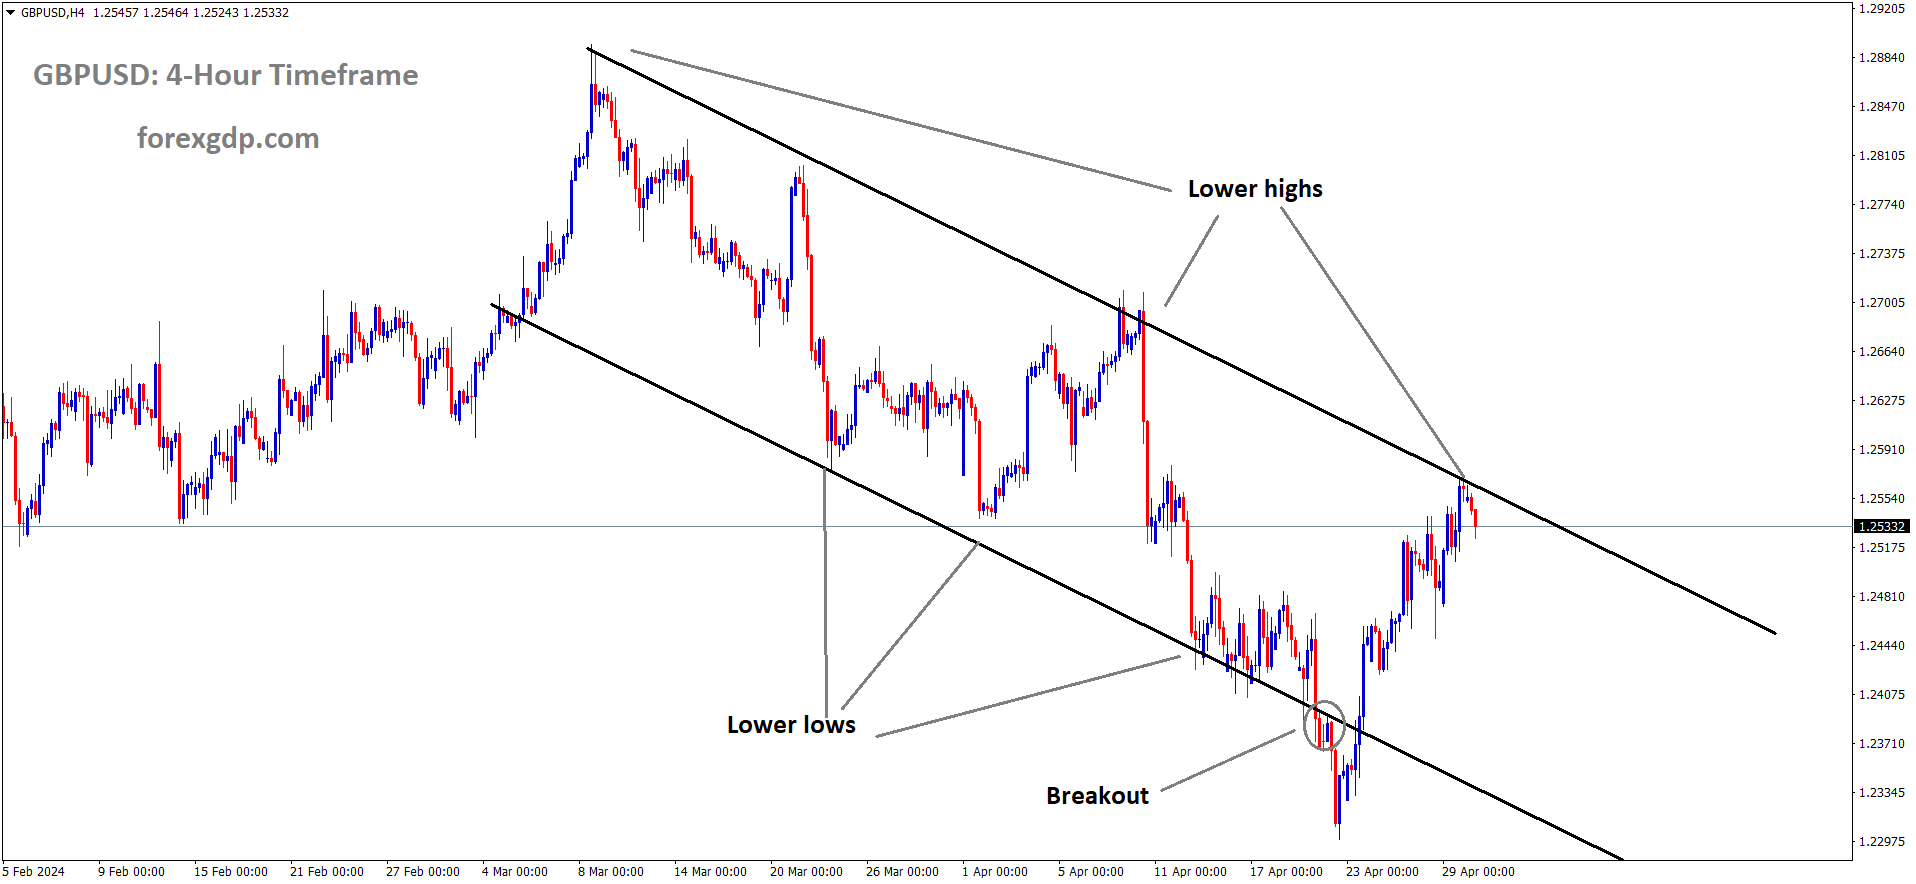 GBPUSD is moving in the Descending channel and the market has fallen from the lower high area of the channel